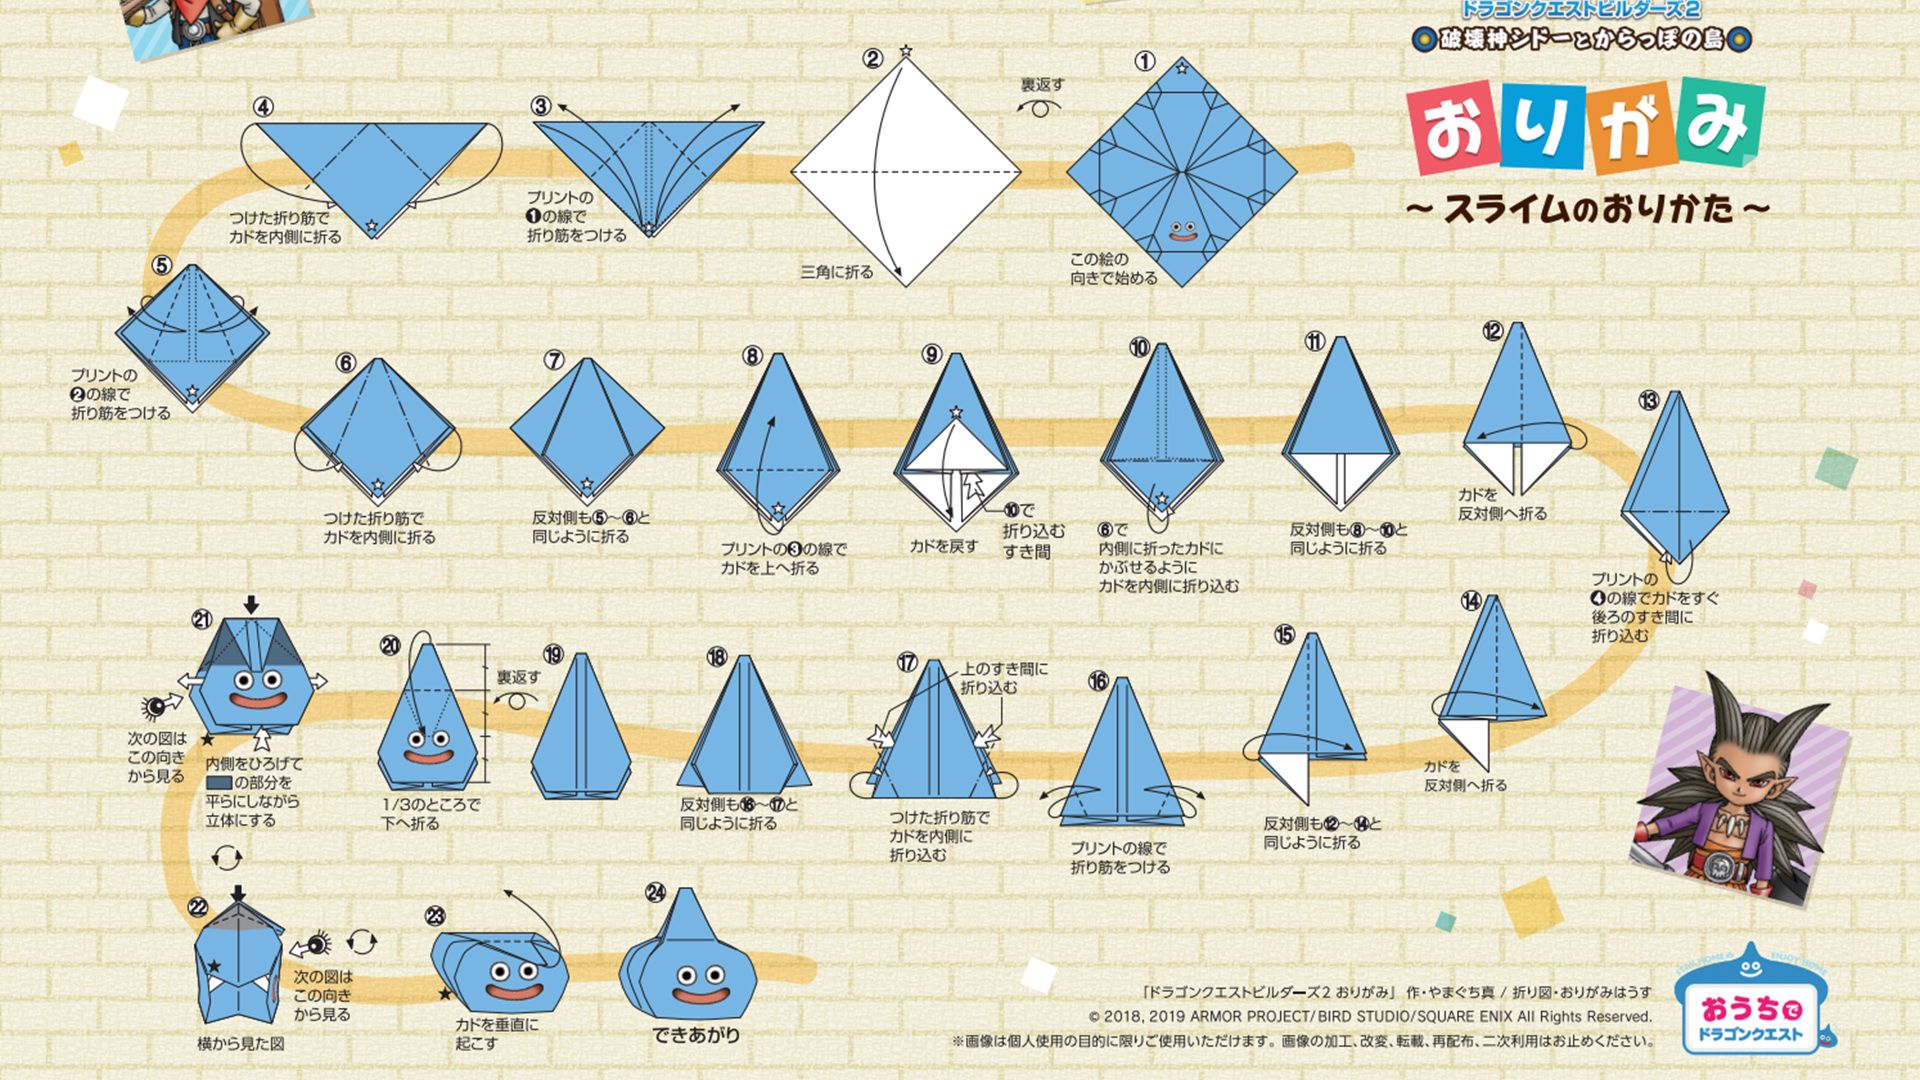 Square Enix shares some Dragon Quest Slime origami for those stuck at home